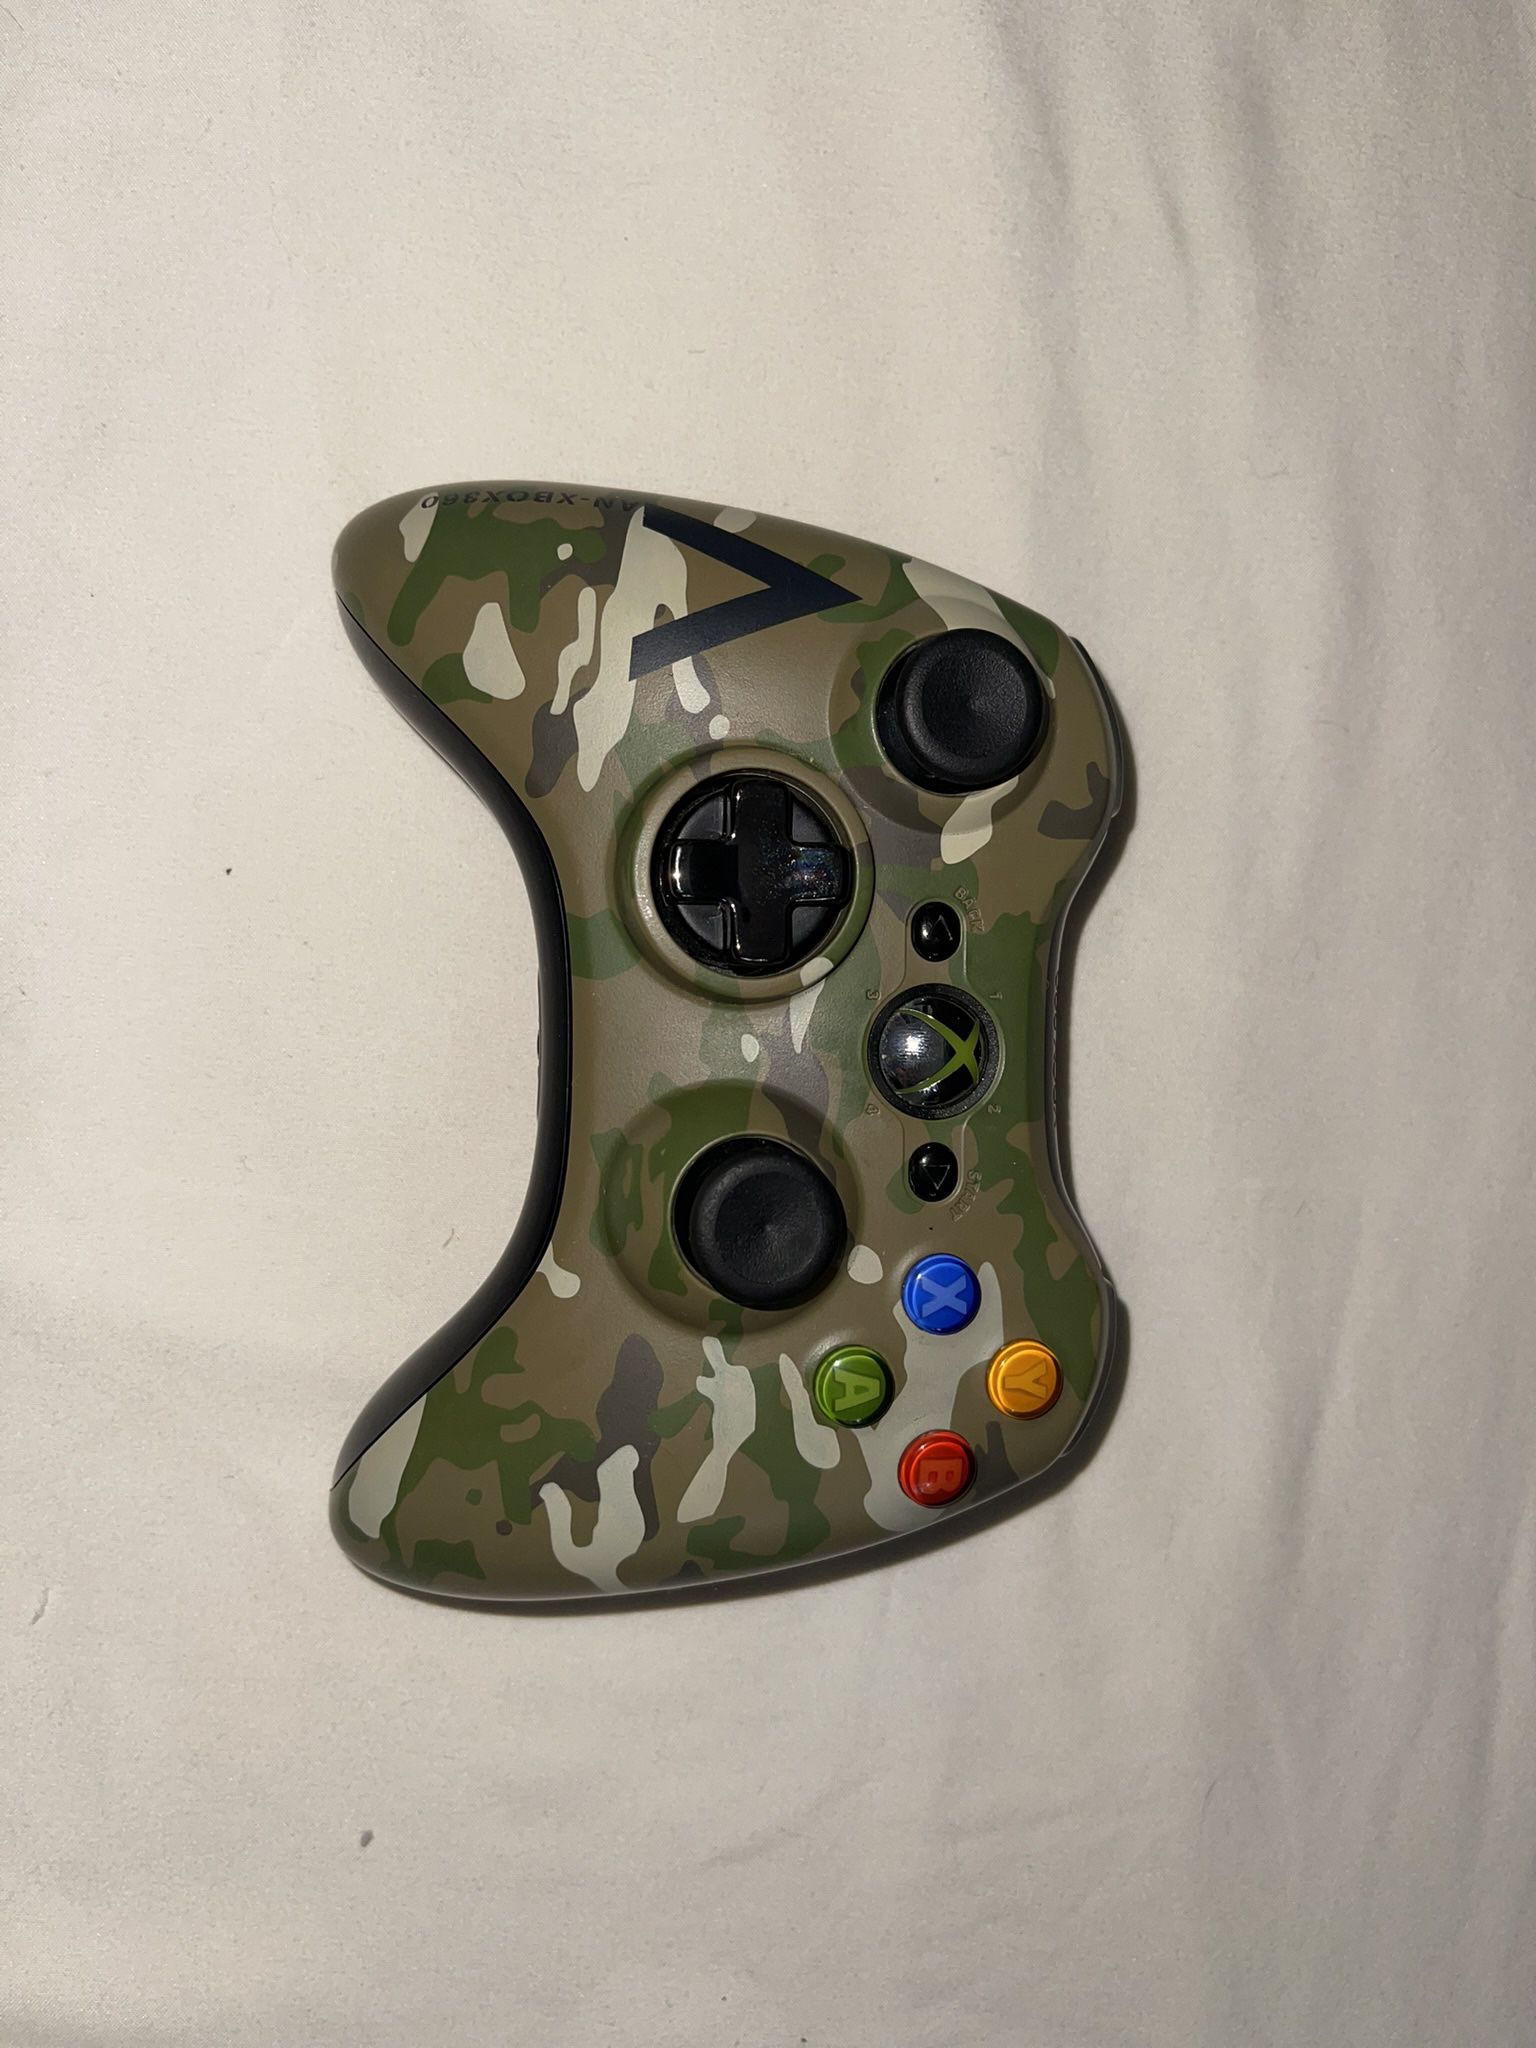 Xbox 360 OEM Wireless Controller Halo Special Edition Camouflage Tested Works